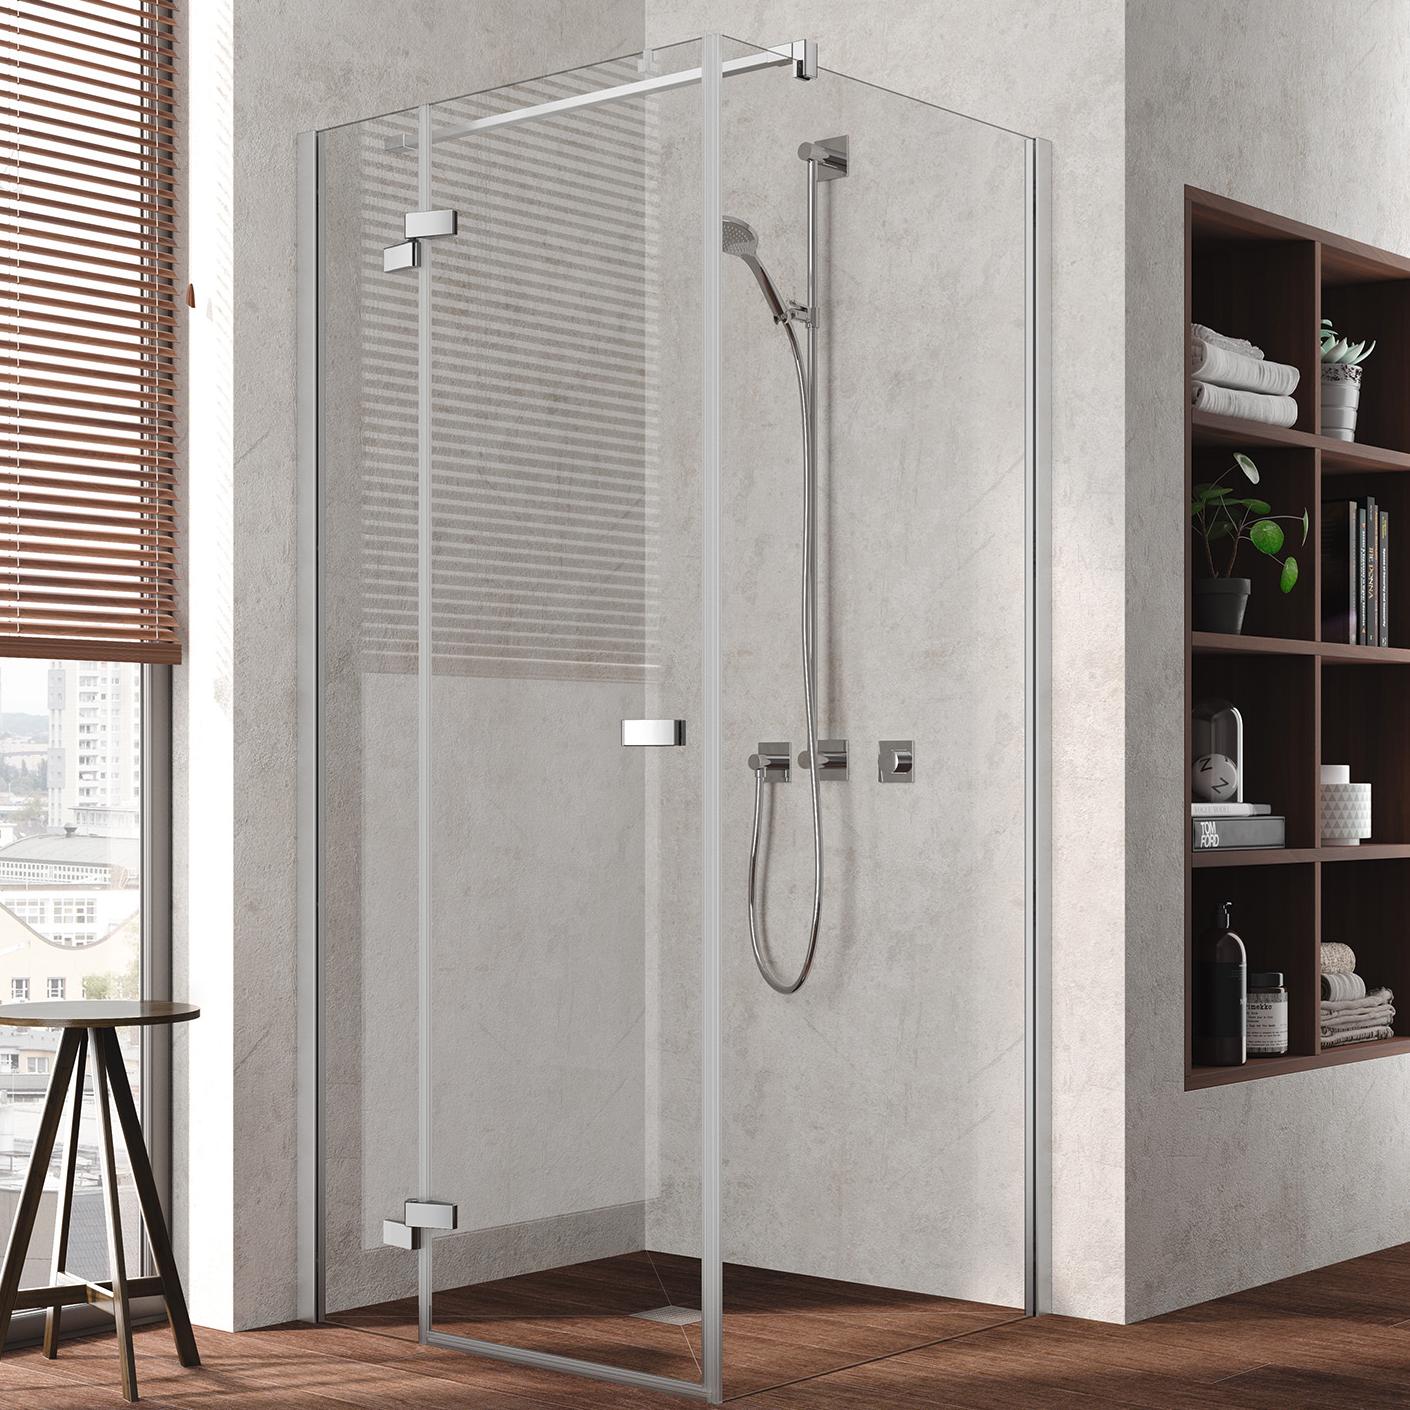 Kermi hinged shower enclosure, TUSCA single panel hinged door with fixed panel with wall profile